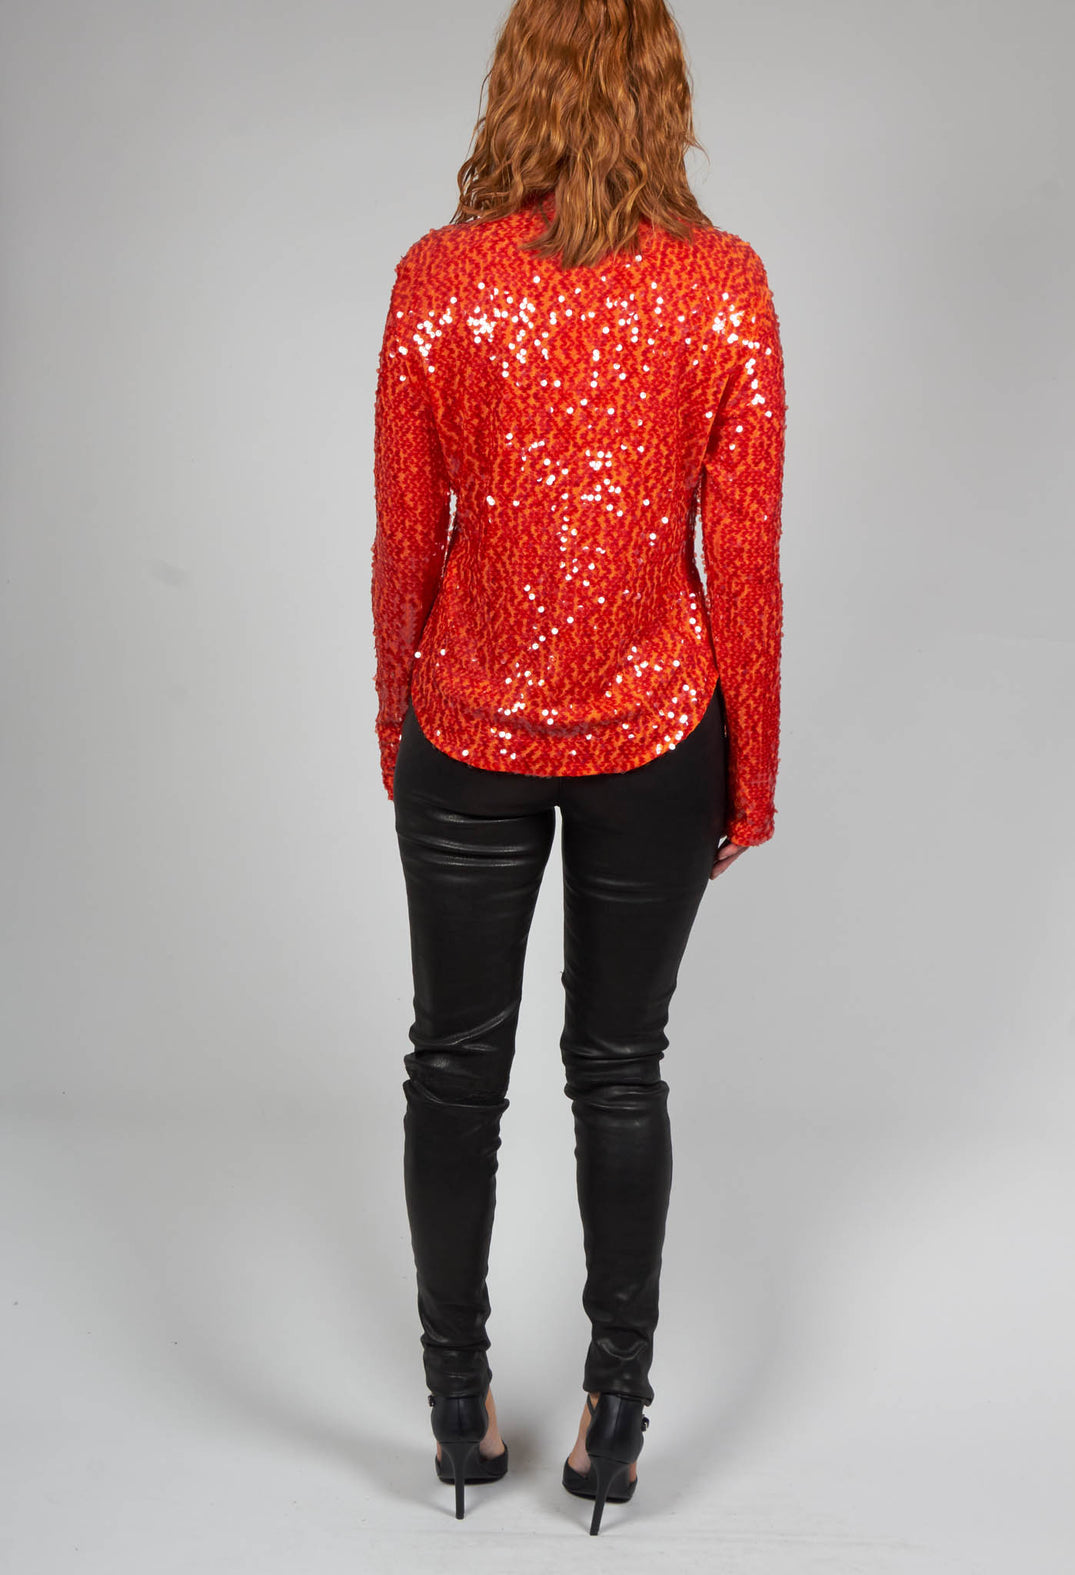 behind shot of lady wearing red long sleeve blouse with sequins